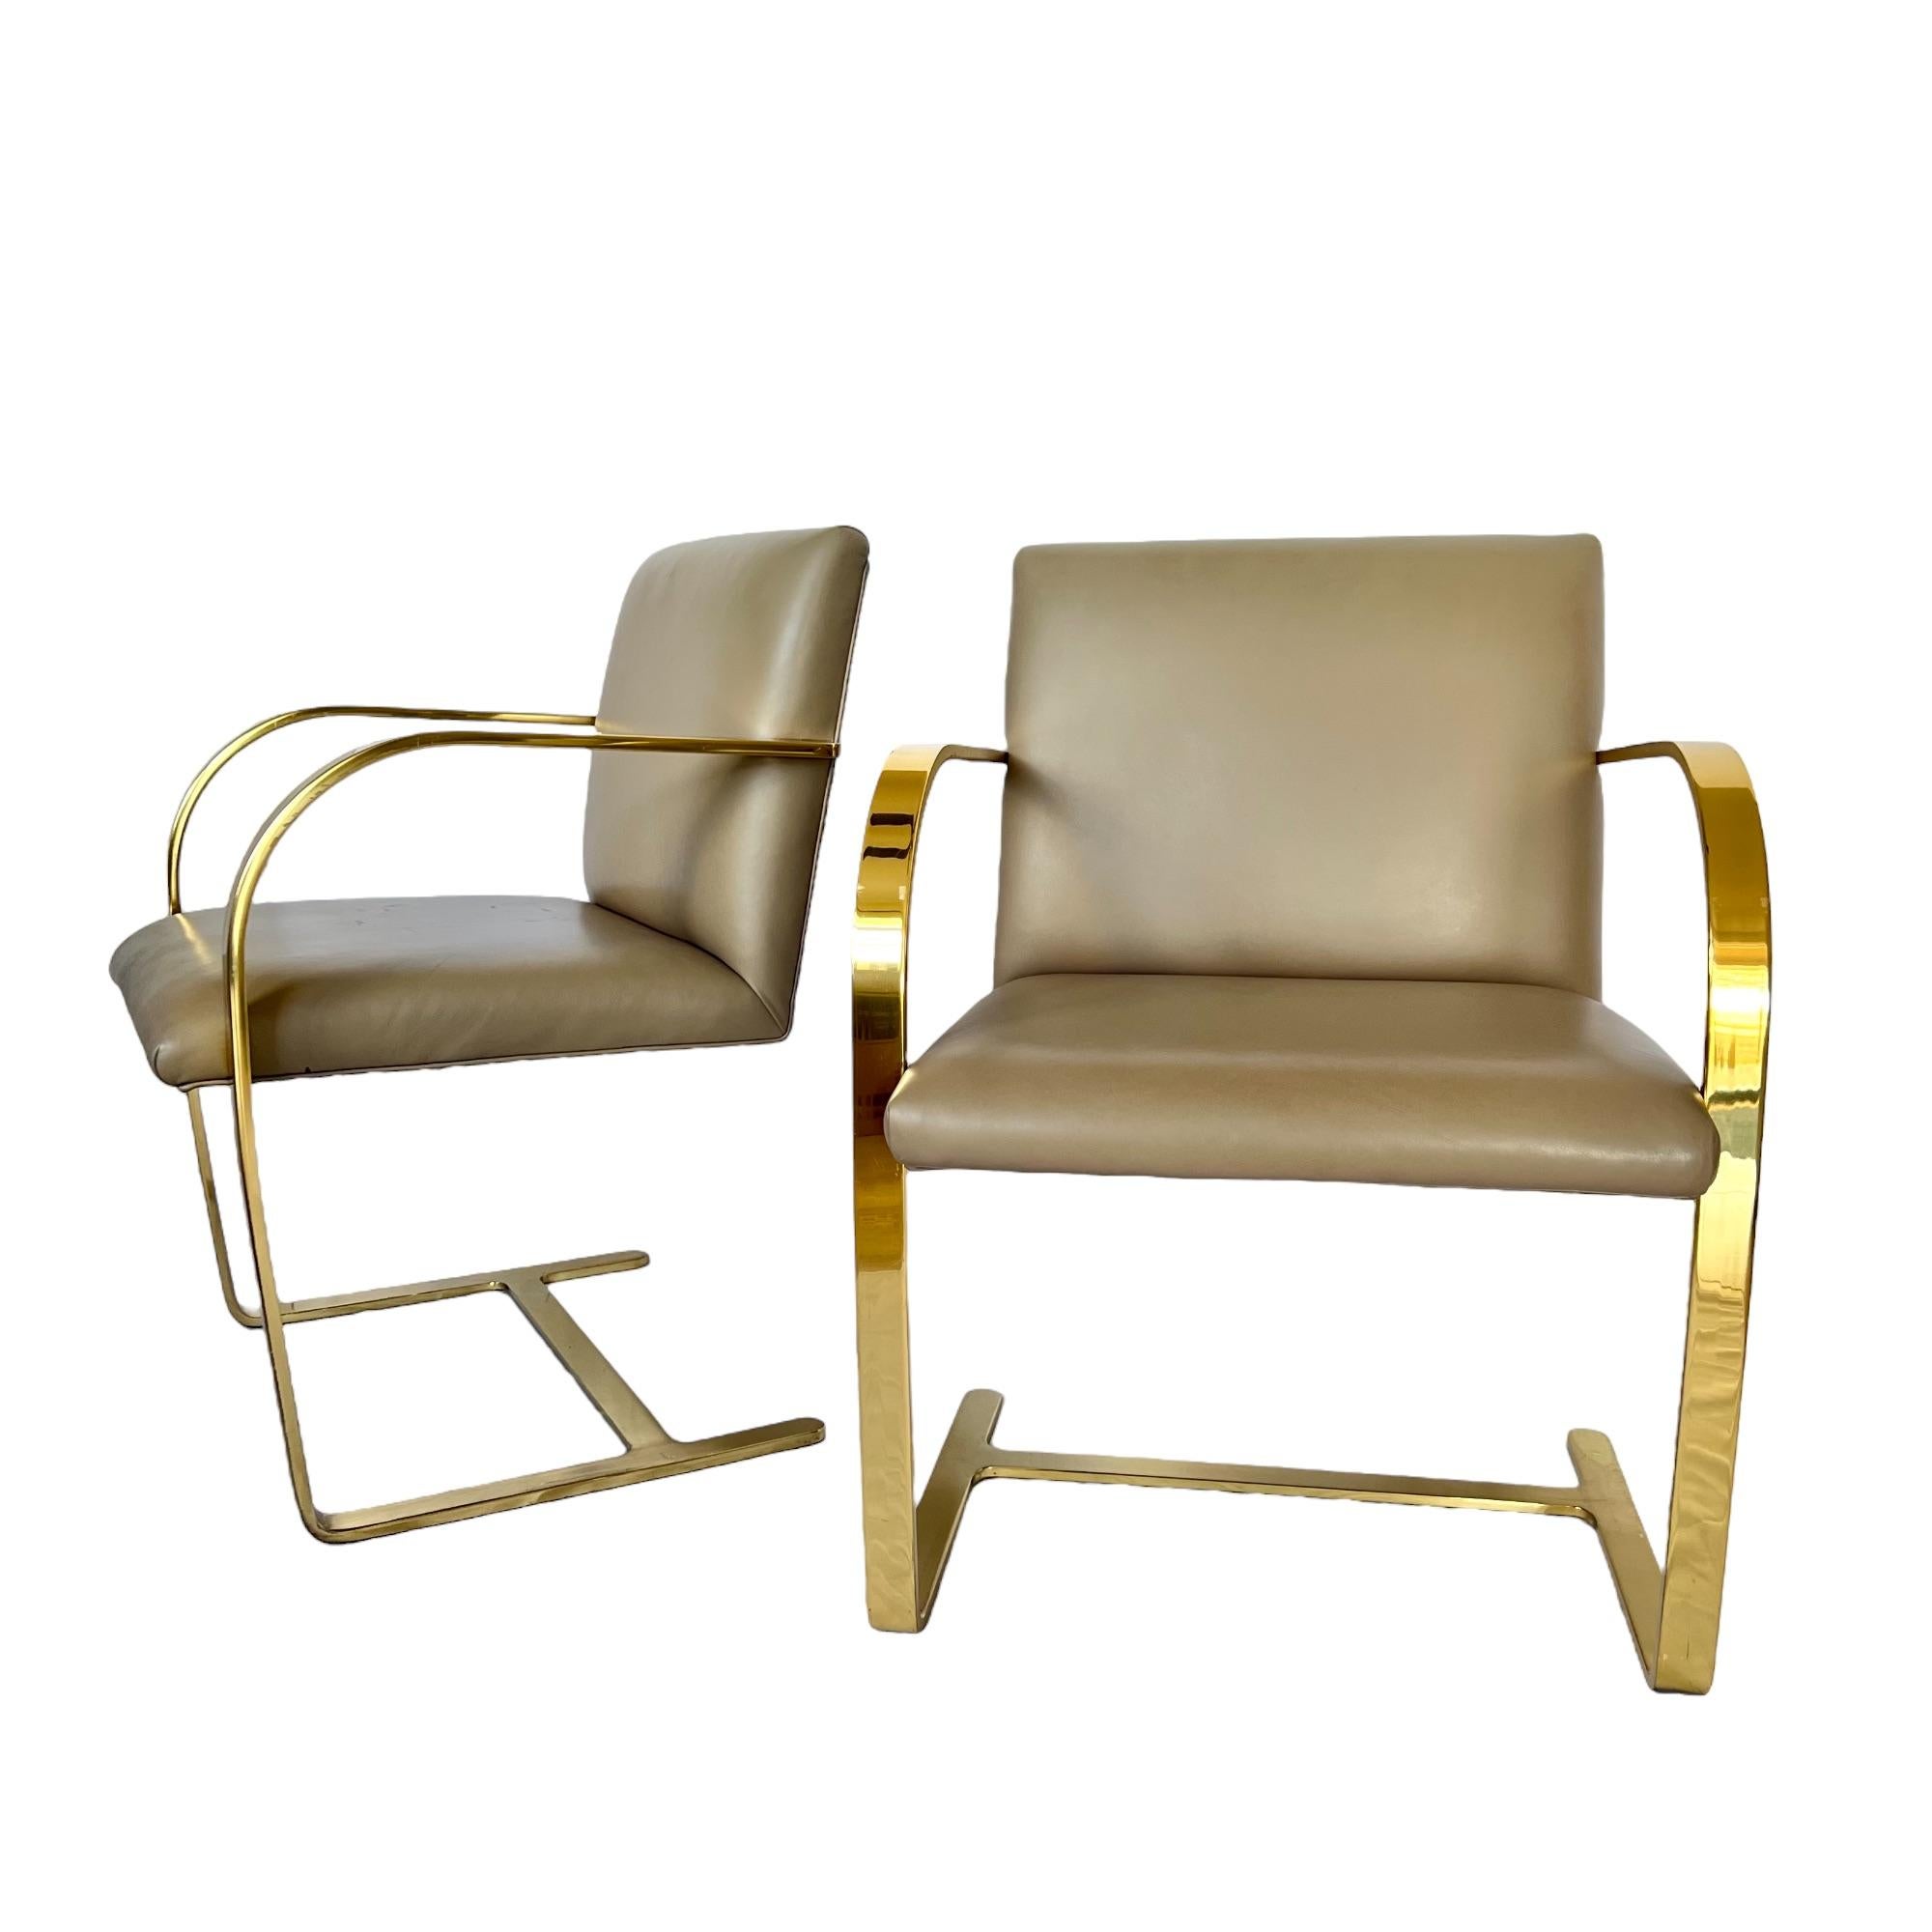 A vintage pair of Mid-Century Modern Brno flat bar armchairs designed by Ludwig Mies van der Rohe and produced by Interior Crafts. Special commission solid brass frame with taupe leather chair back & seat.

Dimensions: 23